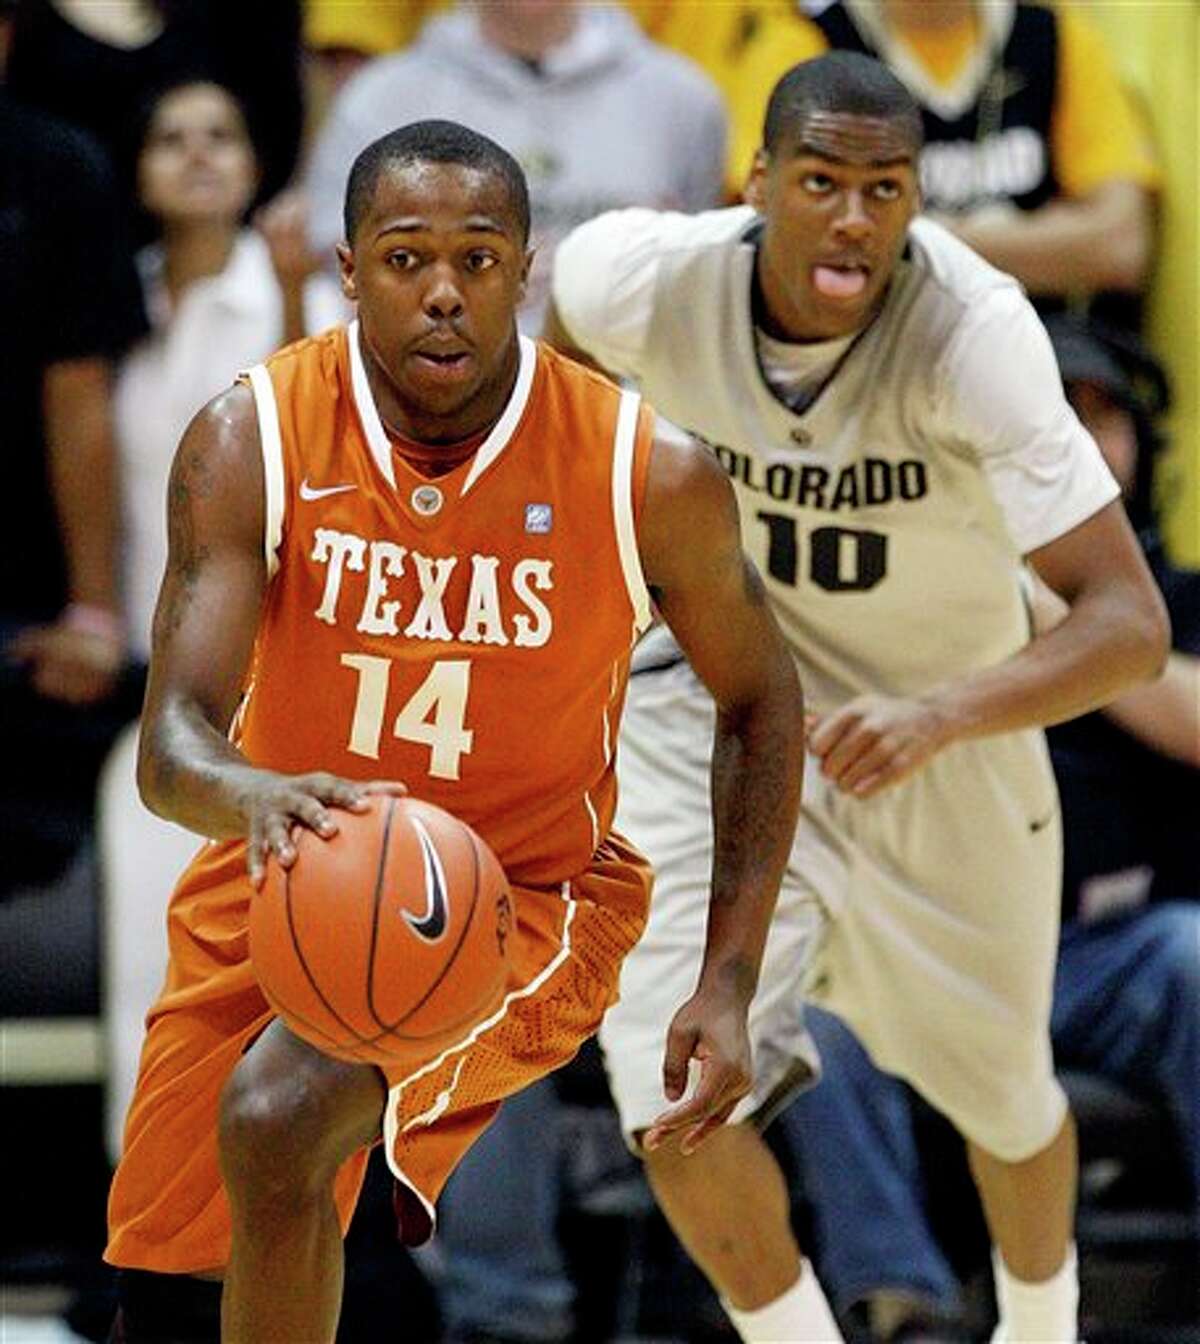 Texas guard J’Covan Brown says, “Nobody trusts us. So we really don’t have anything to lose” today. ASSOCIATED PRESS